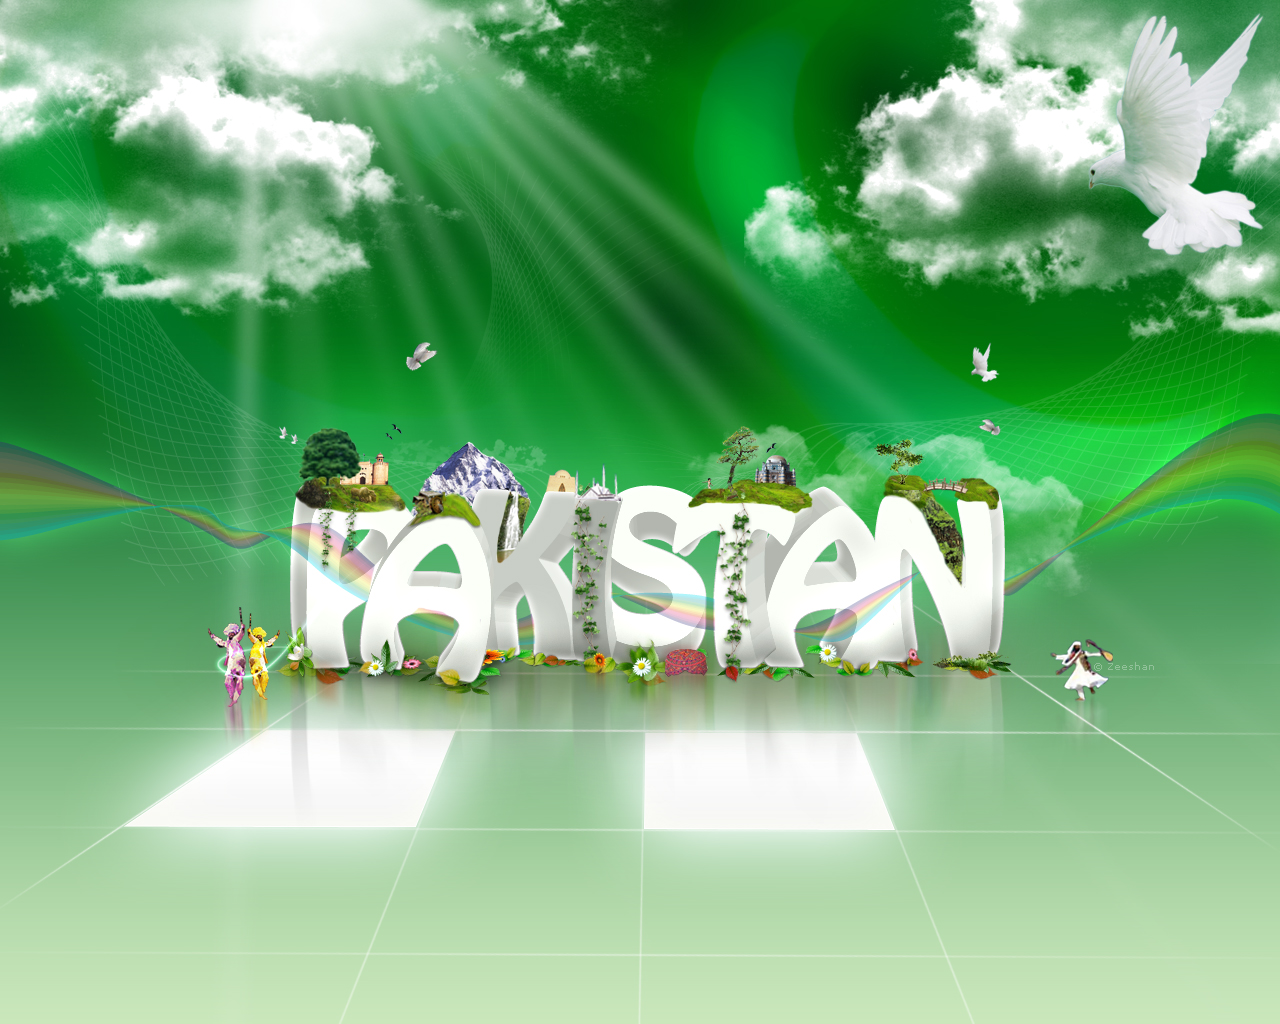 Pakistan Day Wallpaper Gallery March